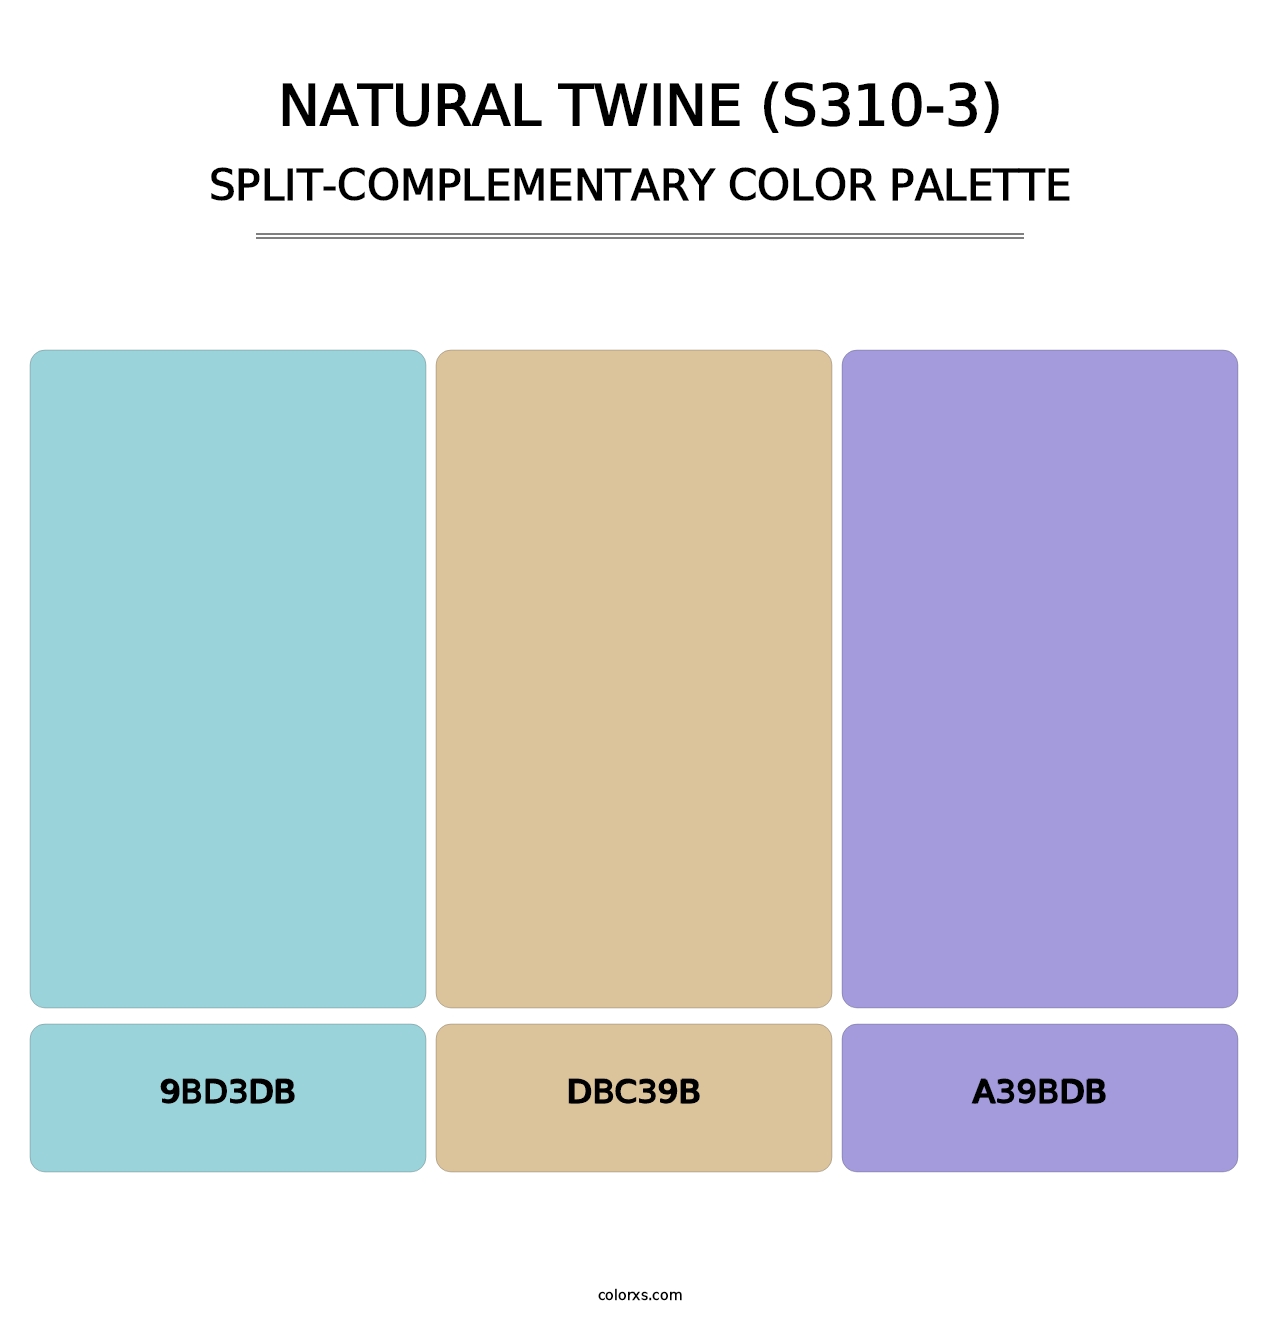 Natural Twine (S310-3) - Split-Complementary Color Palette